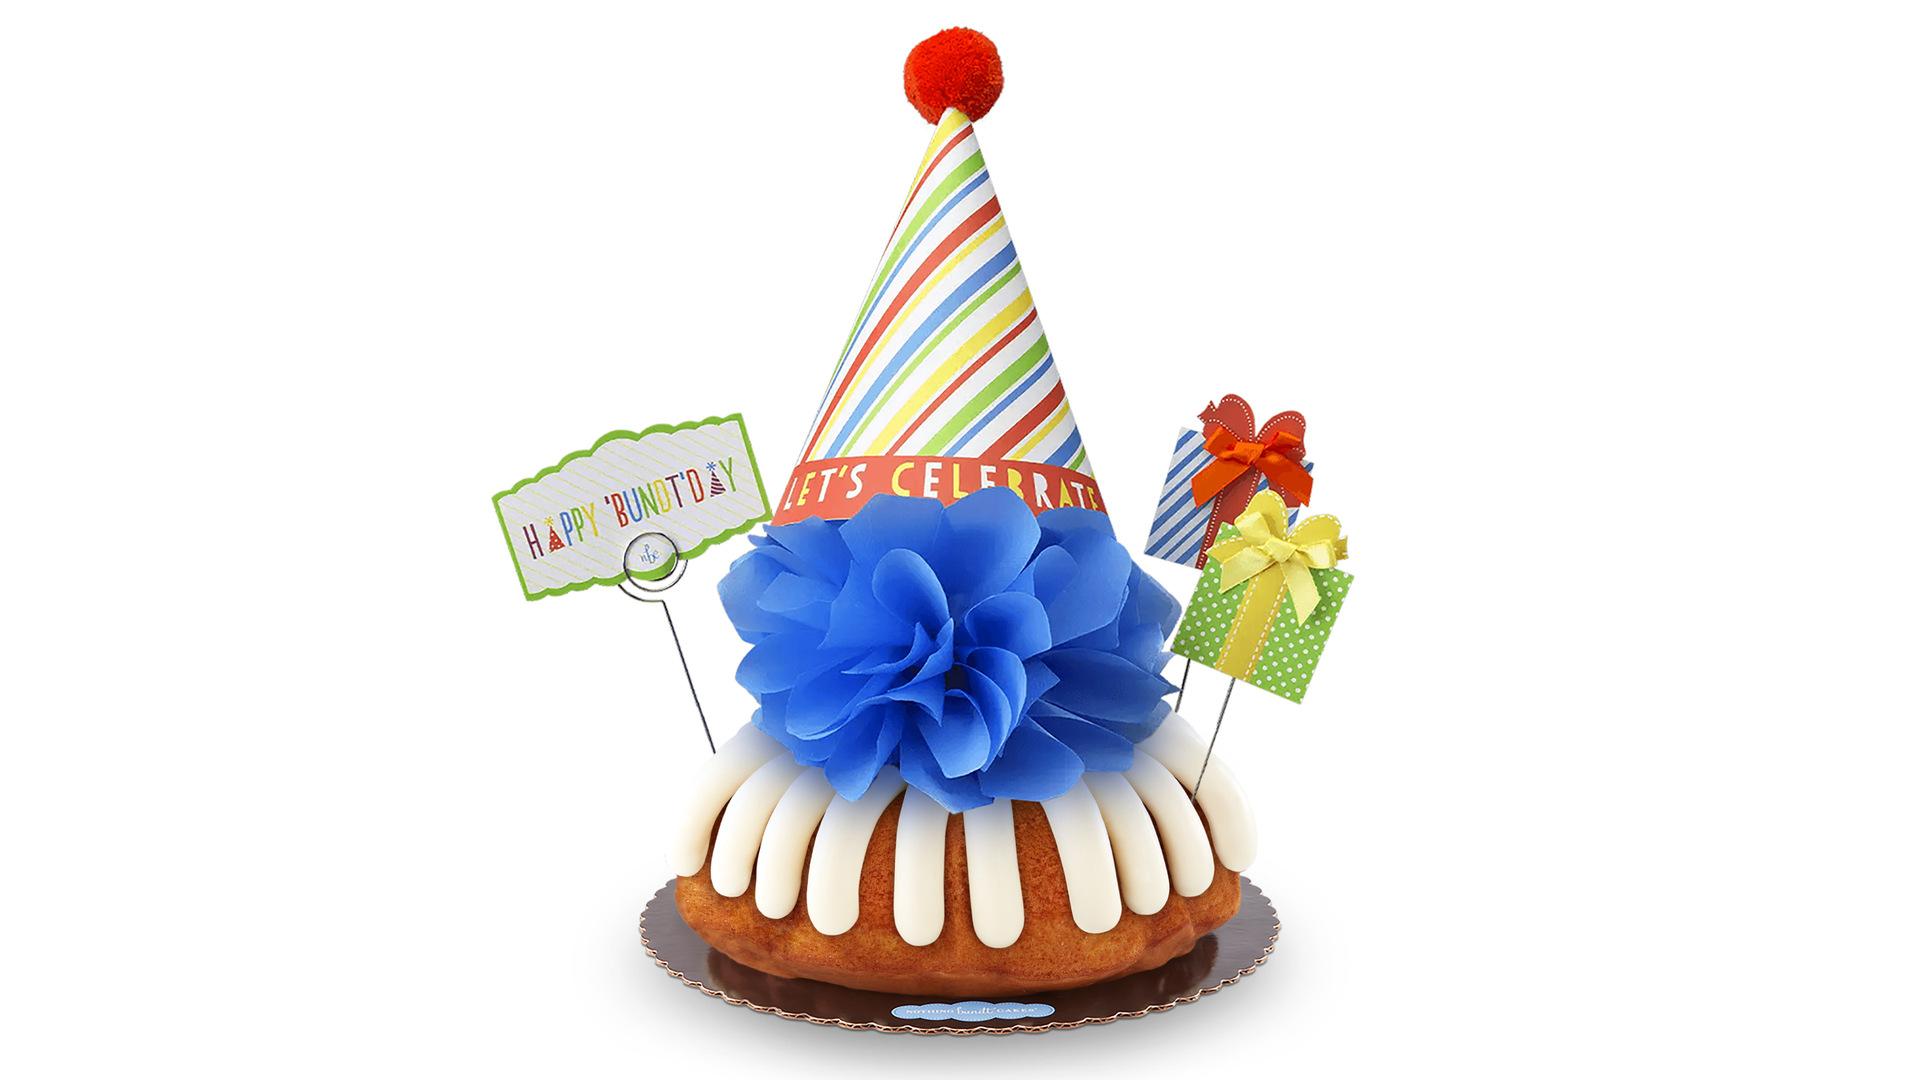 Your Wish Is Granted Birthday Cake Bouquet in San Diego CA - Eden Flowers &  Gifts Inc.